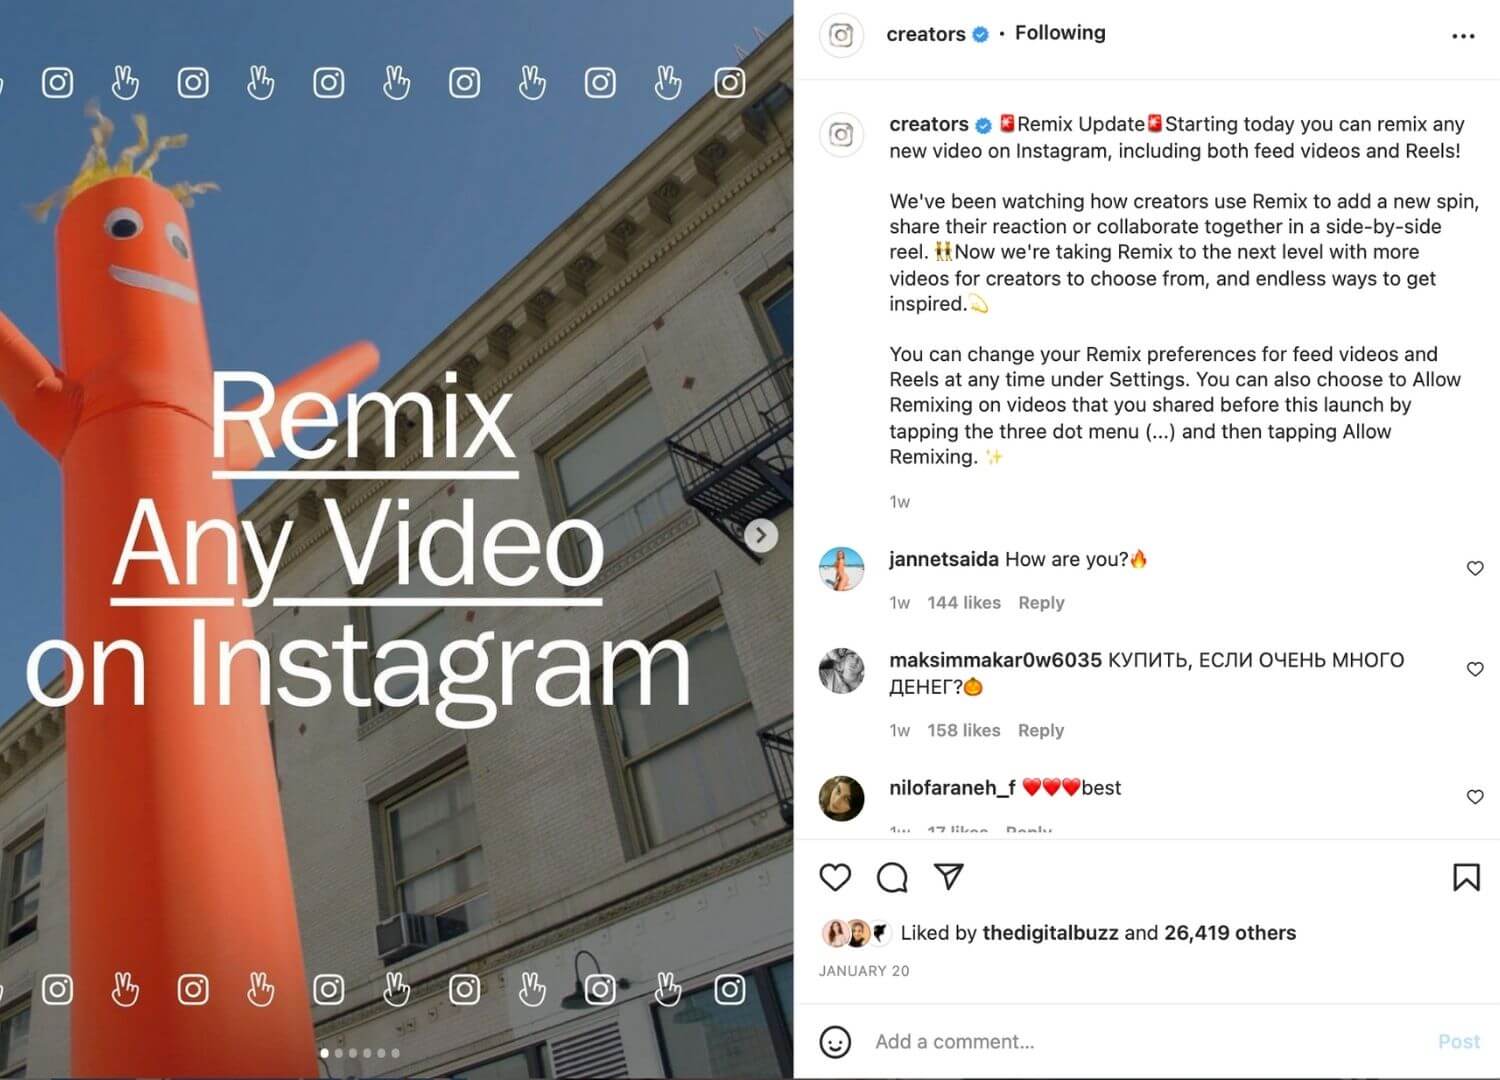 @creators on Instagram post announcing that all Instagram video can now be remixed Instagram Remix